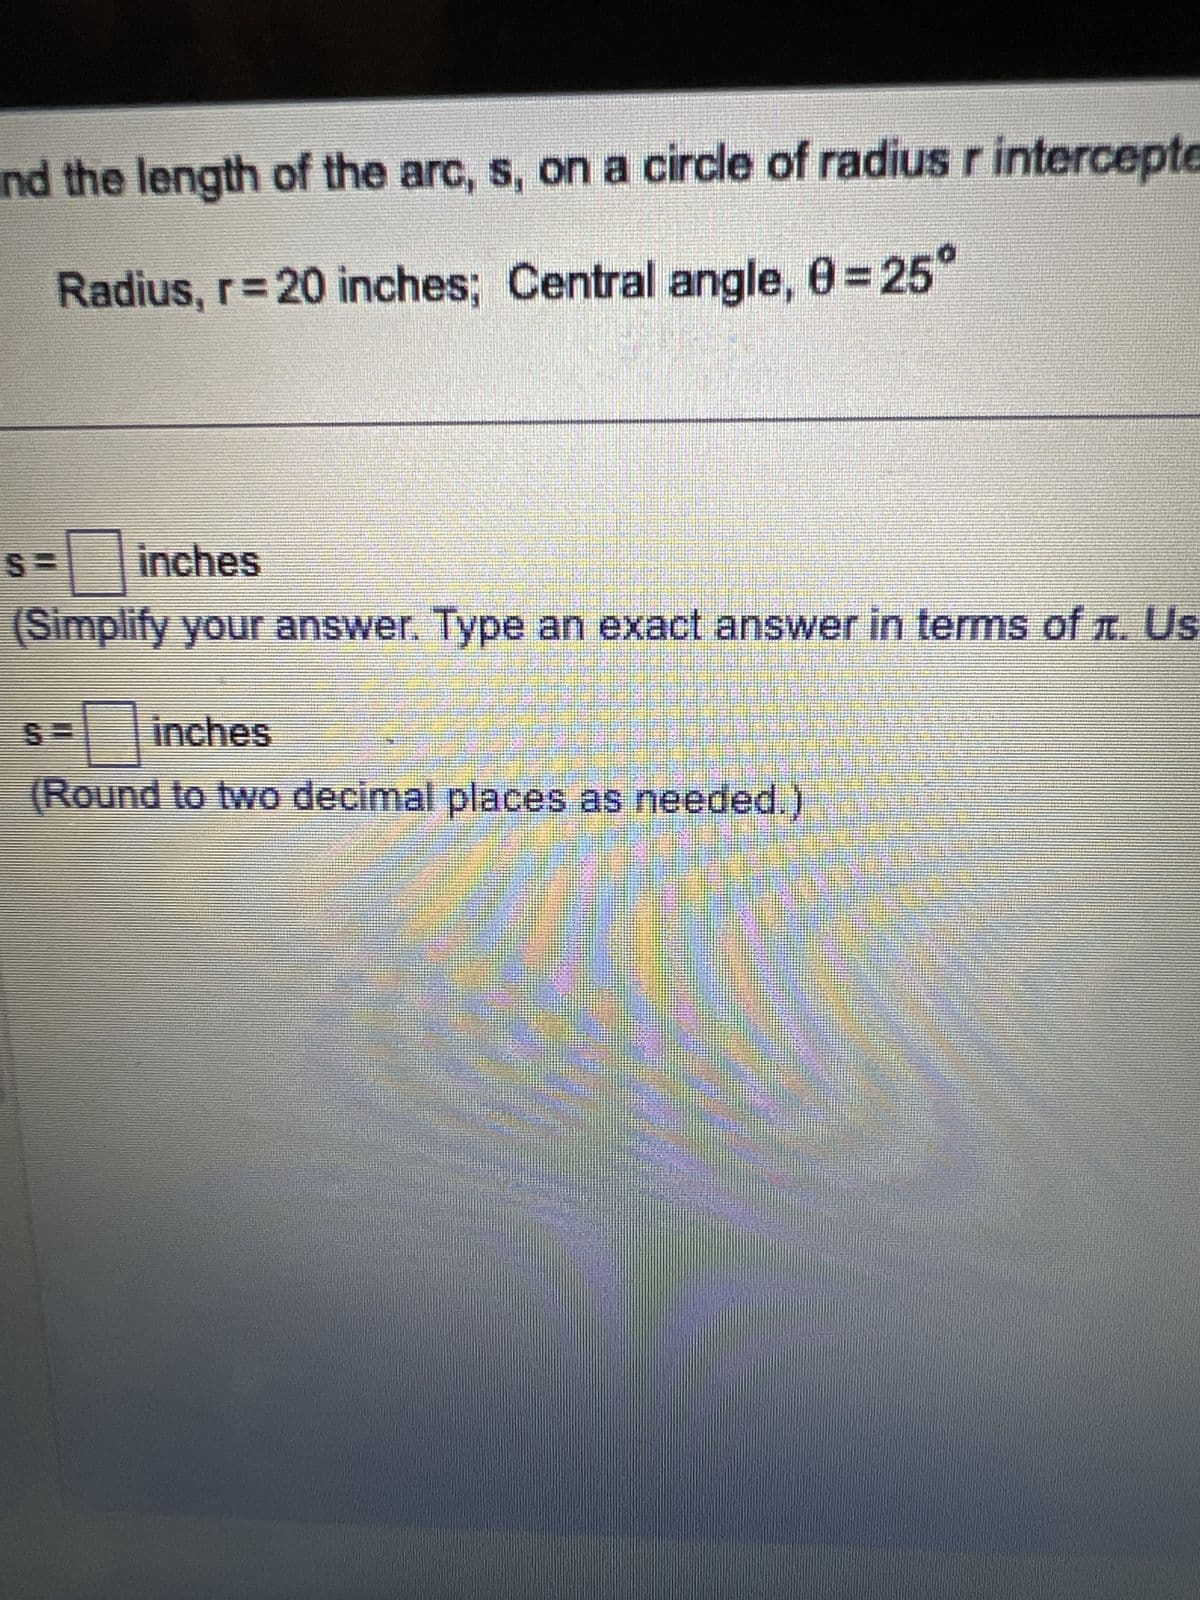 nd the length of the arc, s, on a circle of radius r intercepte
Radius, r = 20 inches; Central angle, 0=25°
inches
(Simplify your answer. Type an exact answer in terms of л. Us
inches
(Round to two decimal places as needed.)